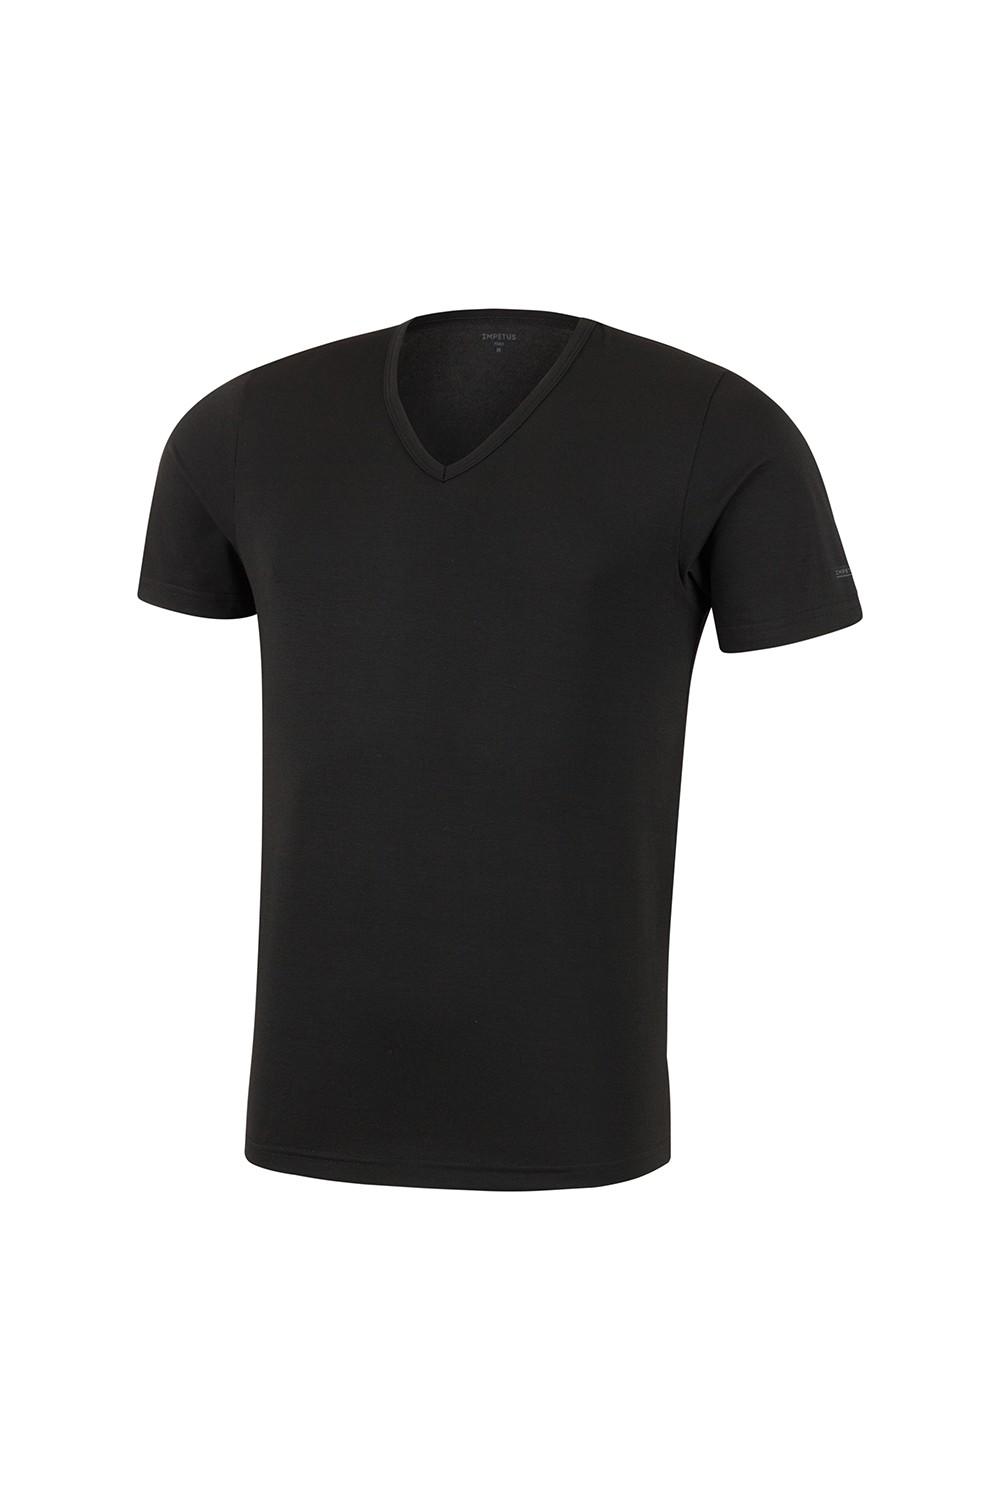 T-SHIRT THERMO MAN